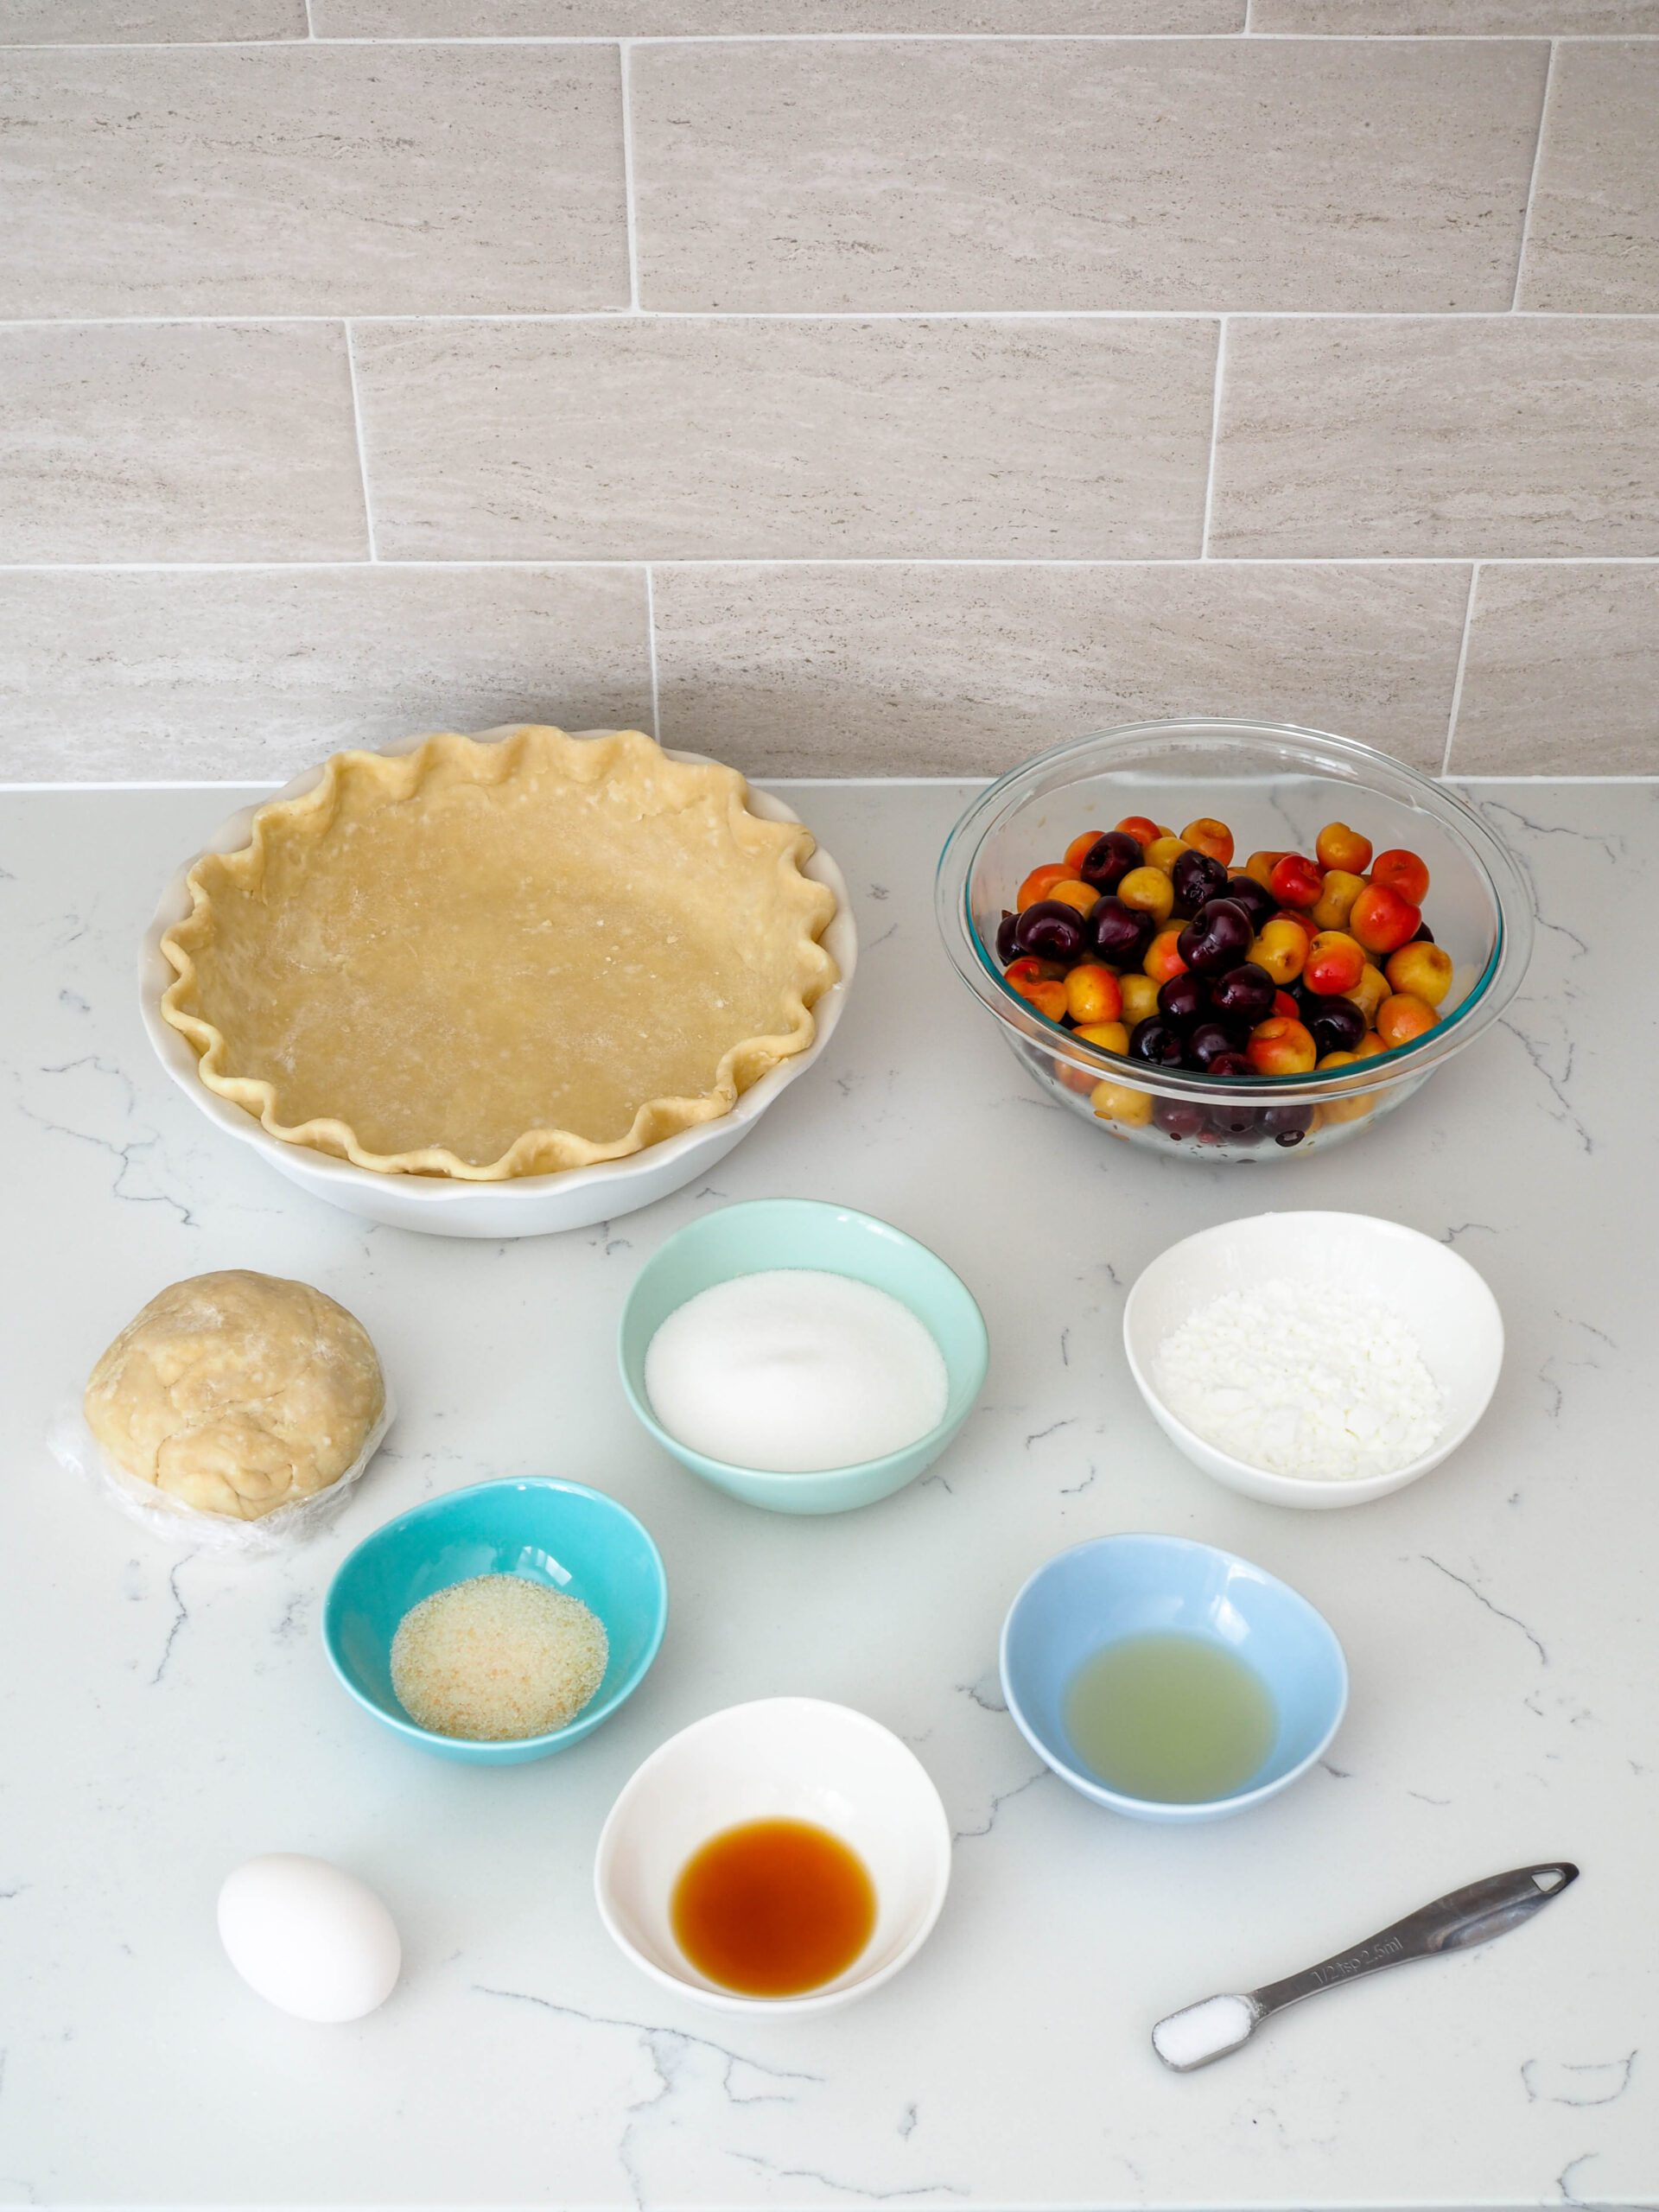 The ingredients for cherry pie with almond extract laid out on a counter.